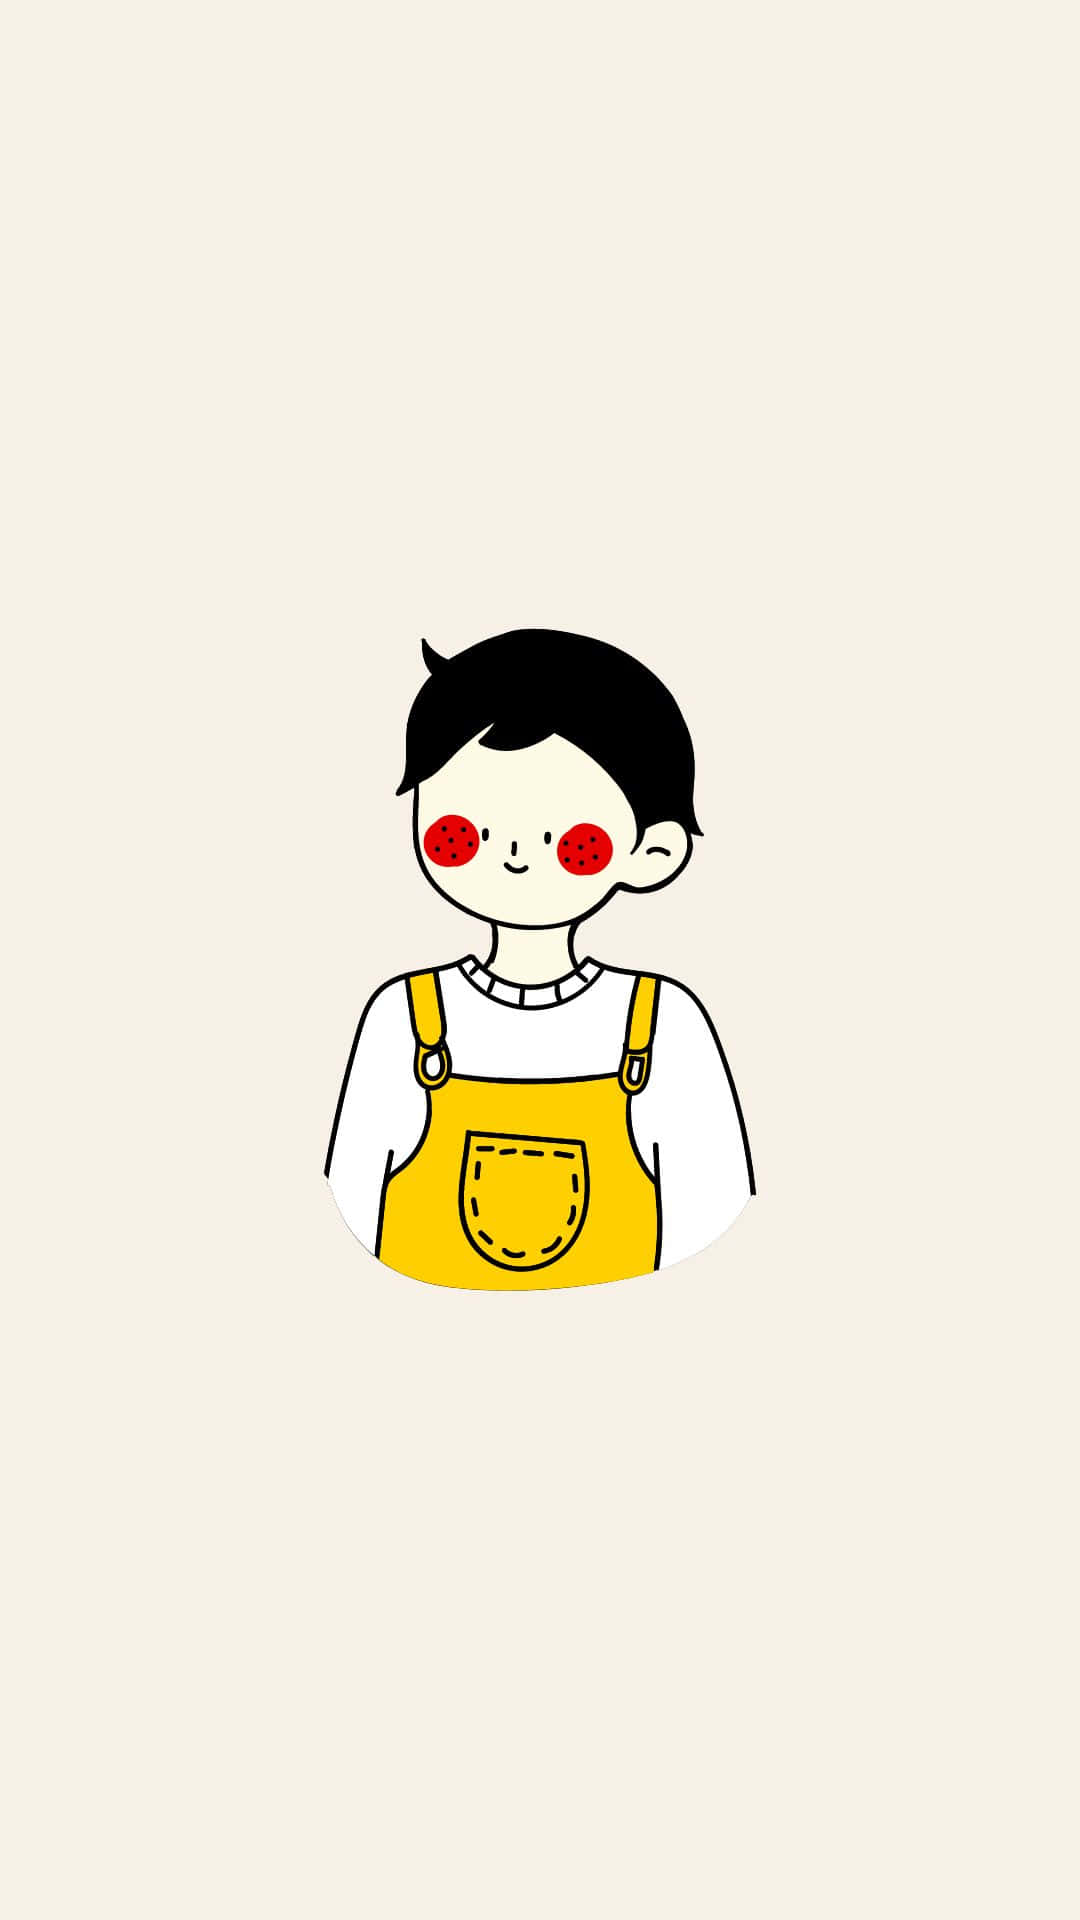 Cool And Stylish Boy Cartoon In Yellow Jumper Background